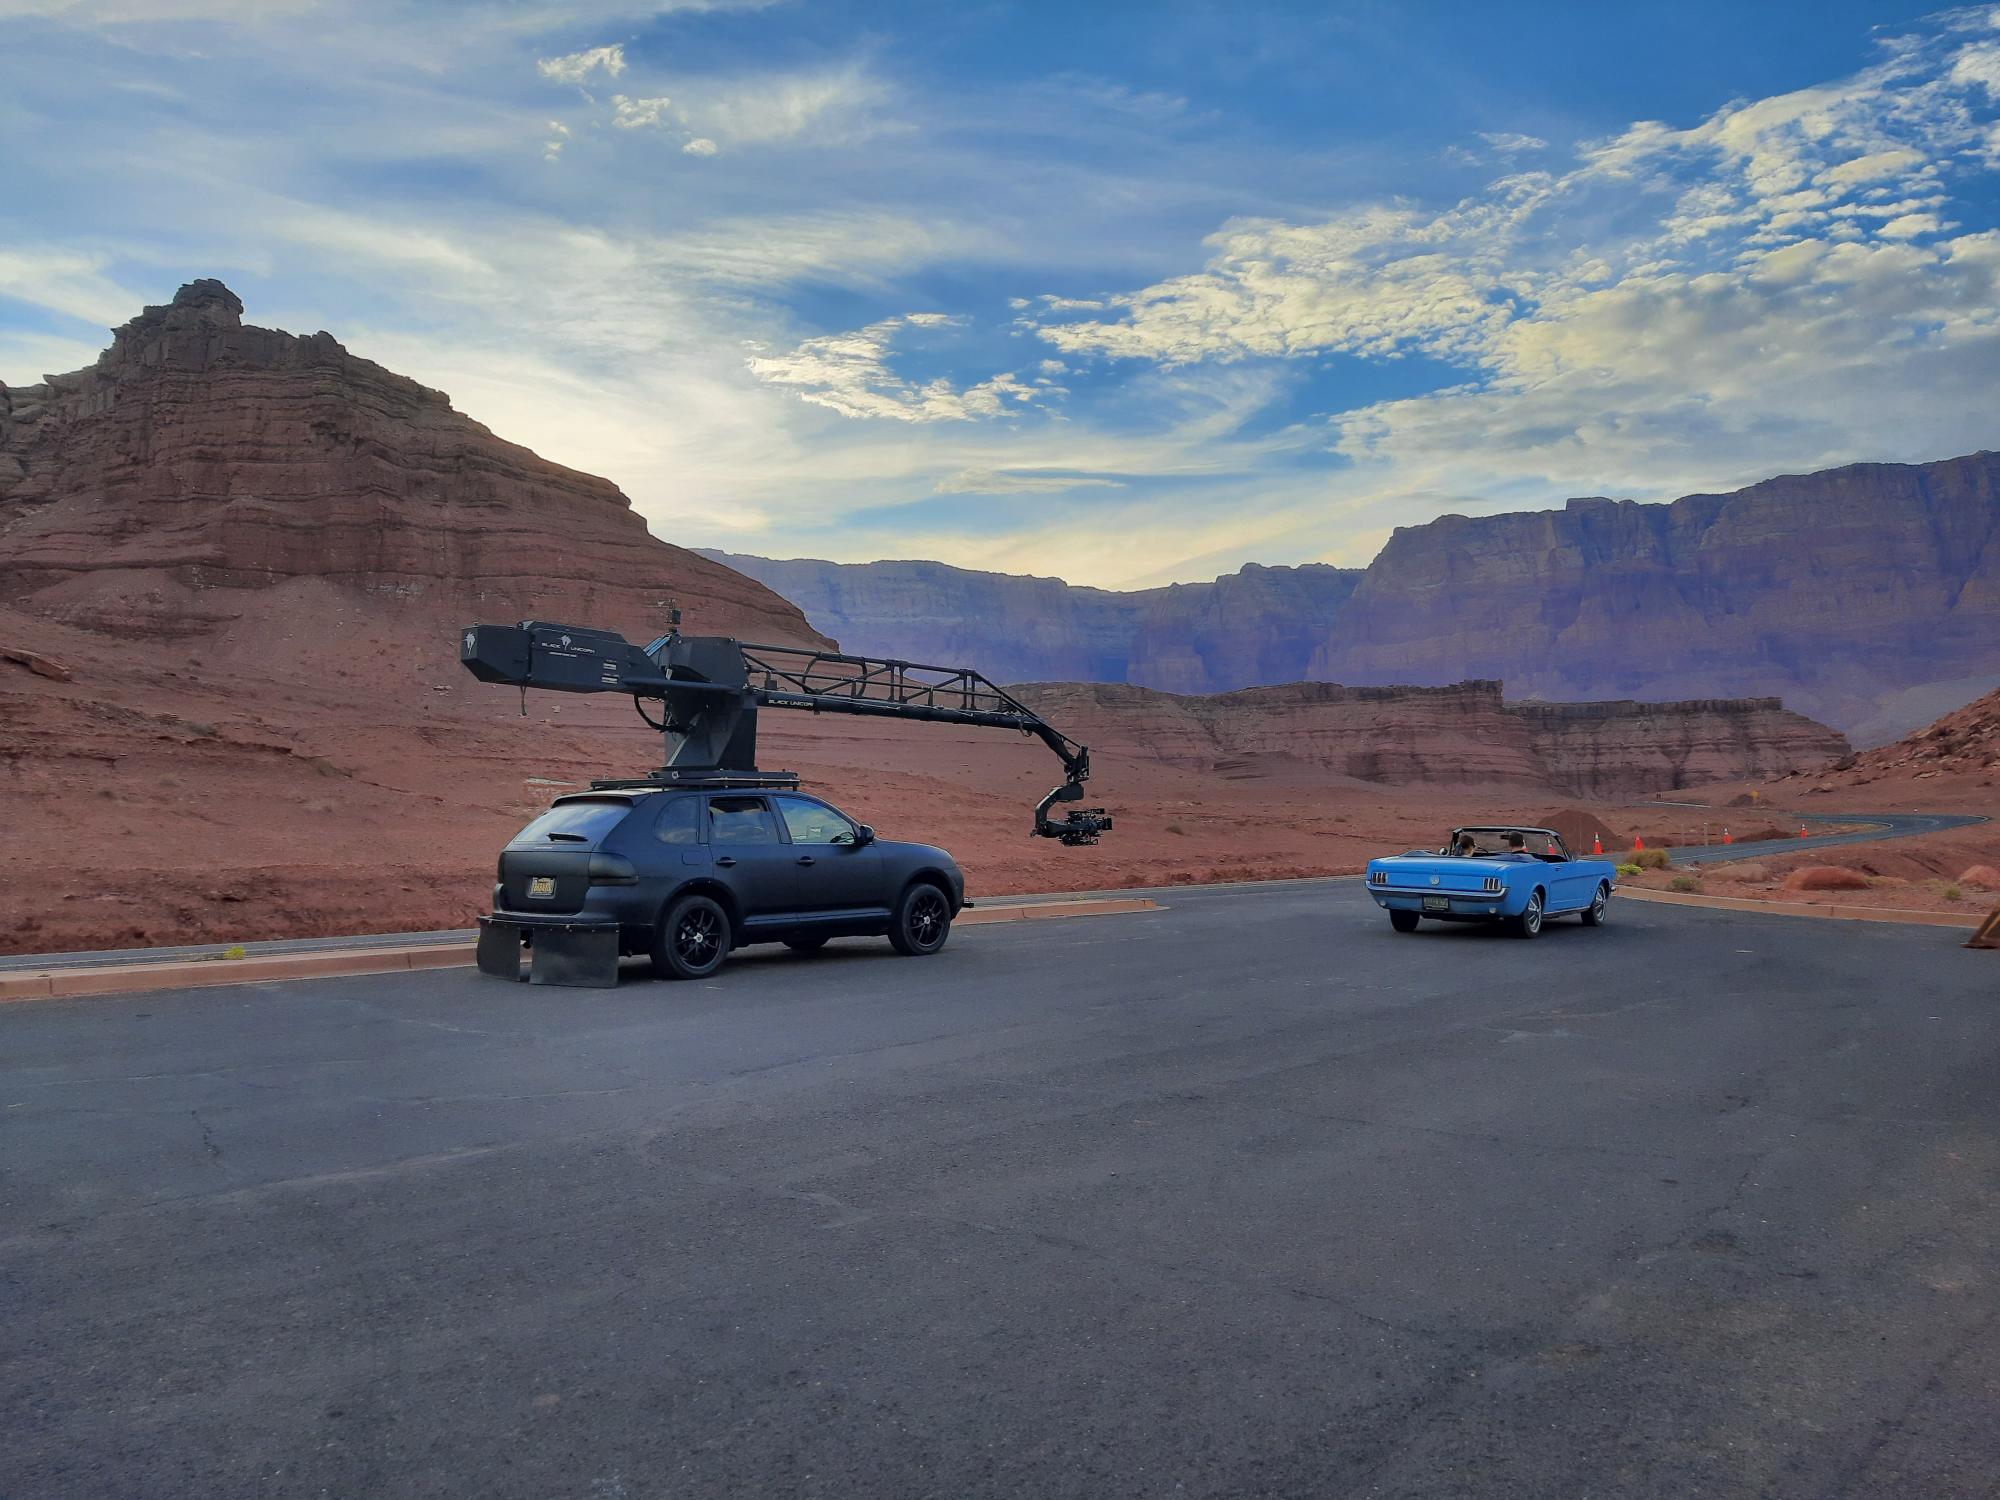 small SUV with large camera rigging equipment parked behind older sportscar in scenic red rock desert